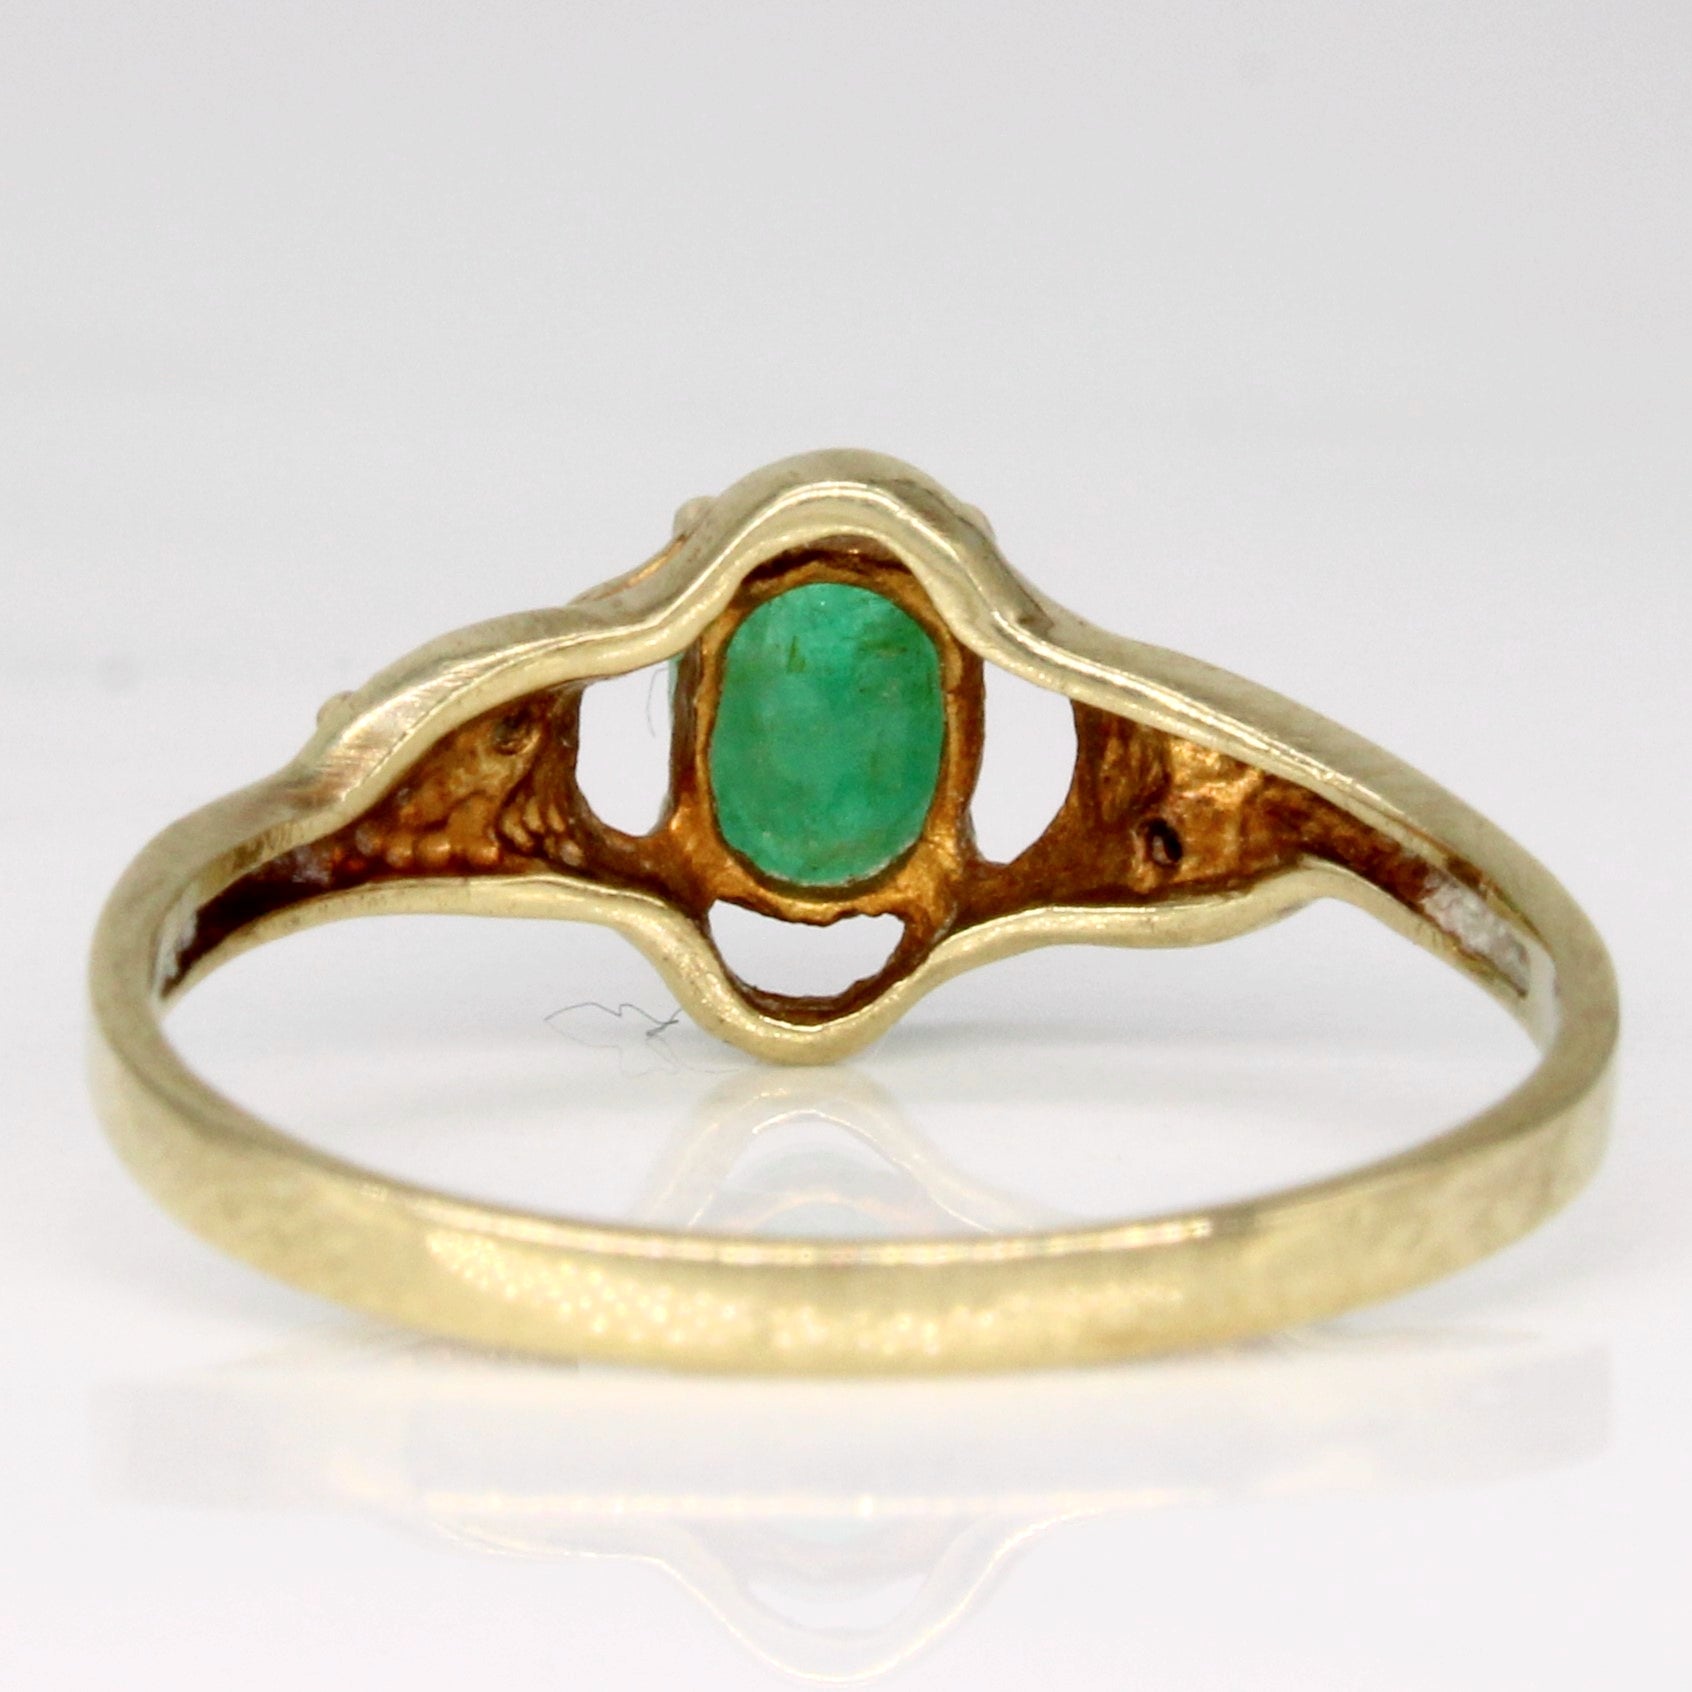 10k Yellow Gold Oval Emerald and Diamond Ring | 0.32ctw | sz 6.75